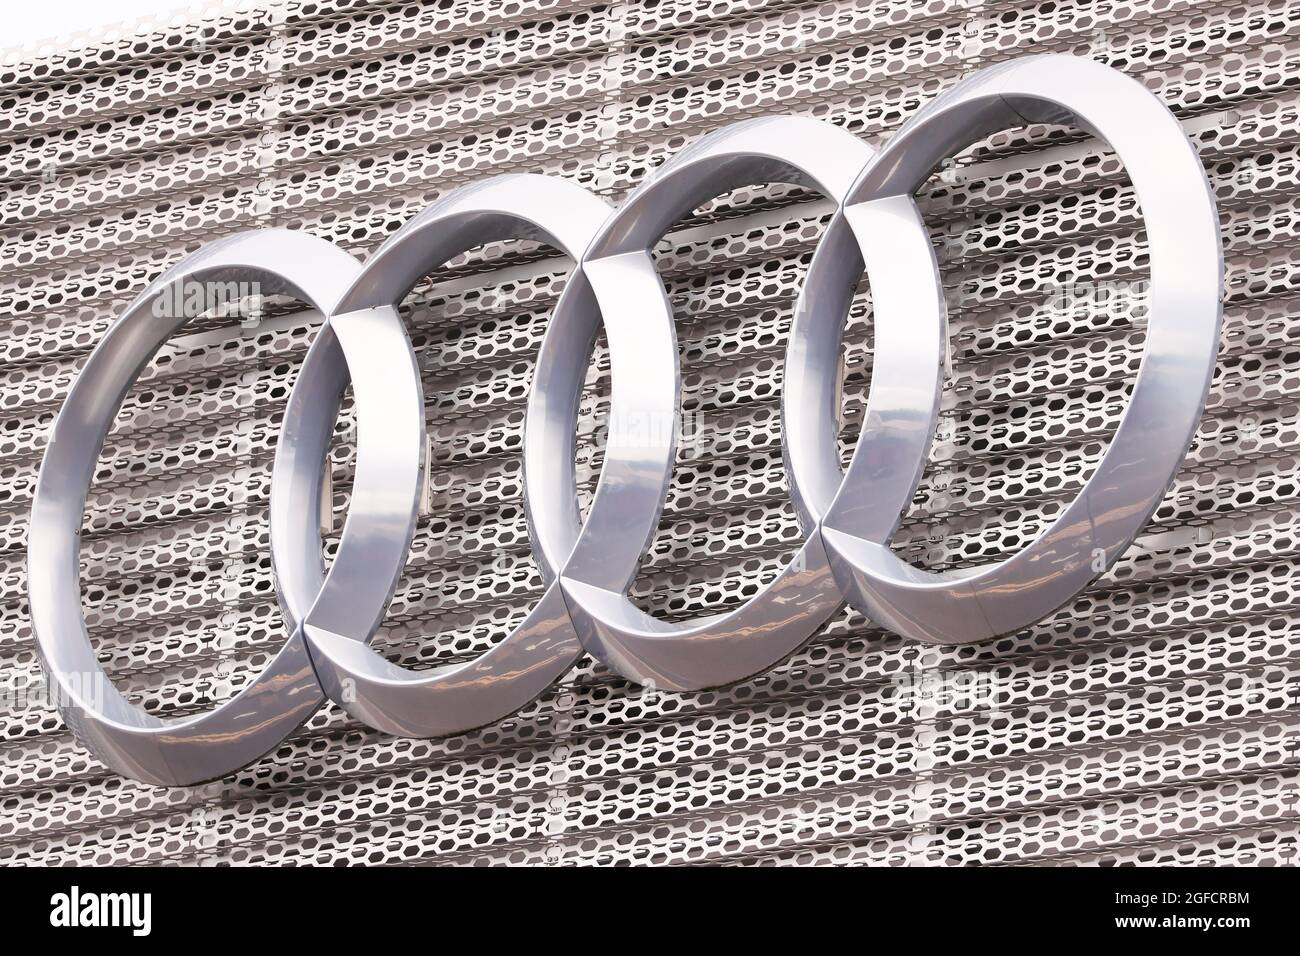 The Audi logo and signage at the main Audi car dealership in Belfast, Northern Ireland. Stock Photo